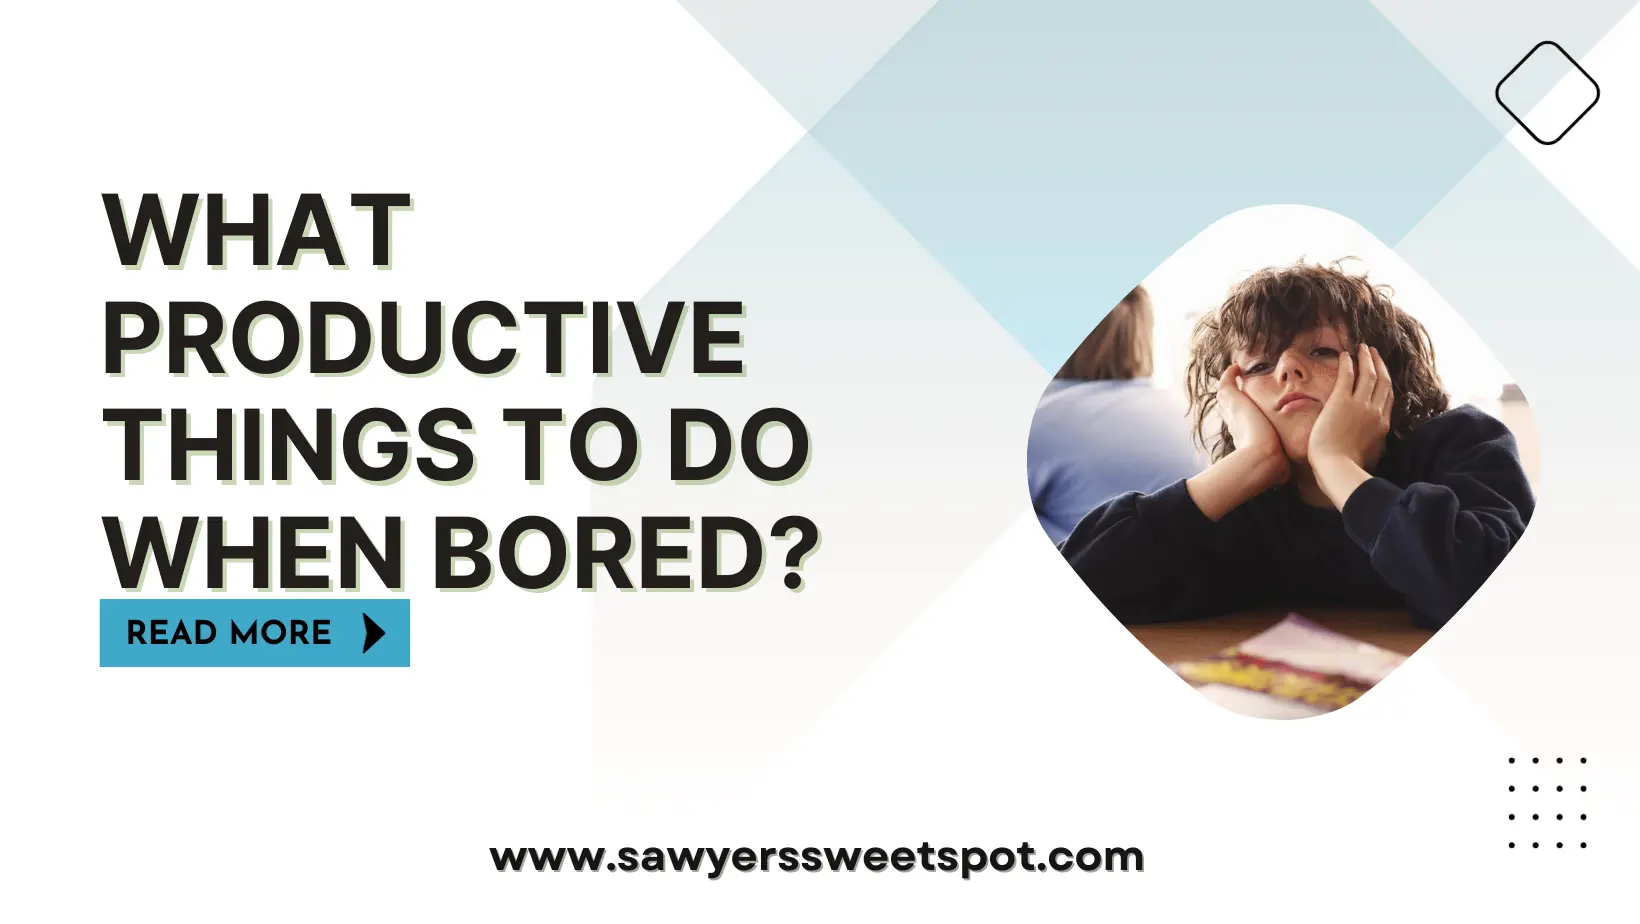 What Productive Things to do when Bored?